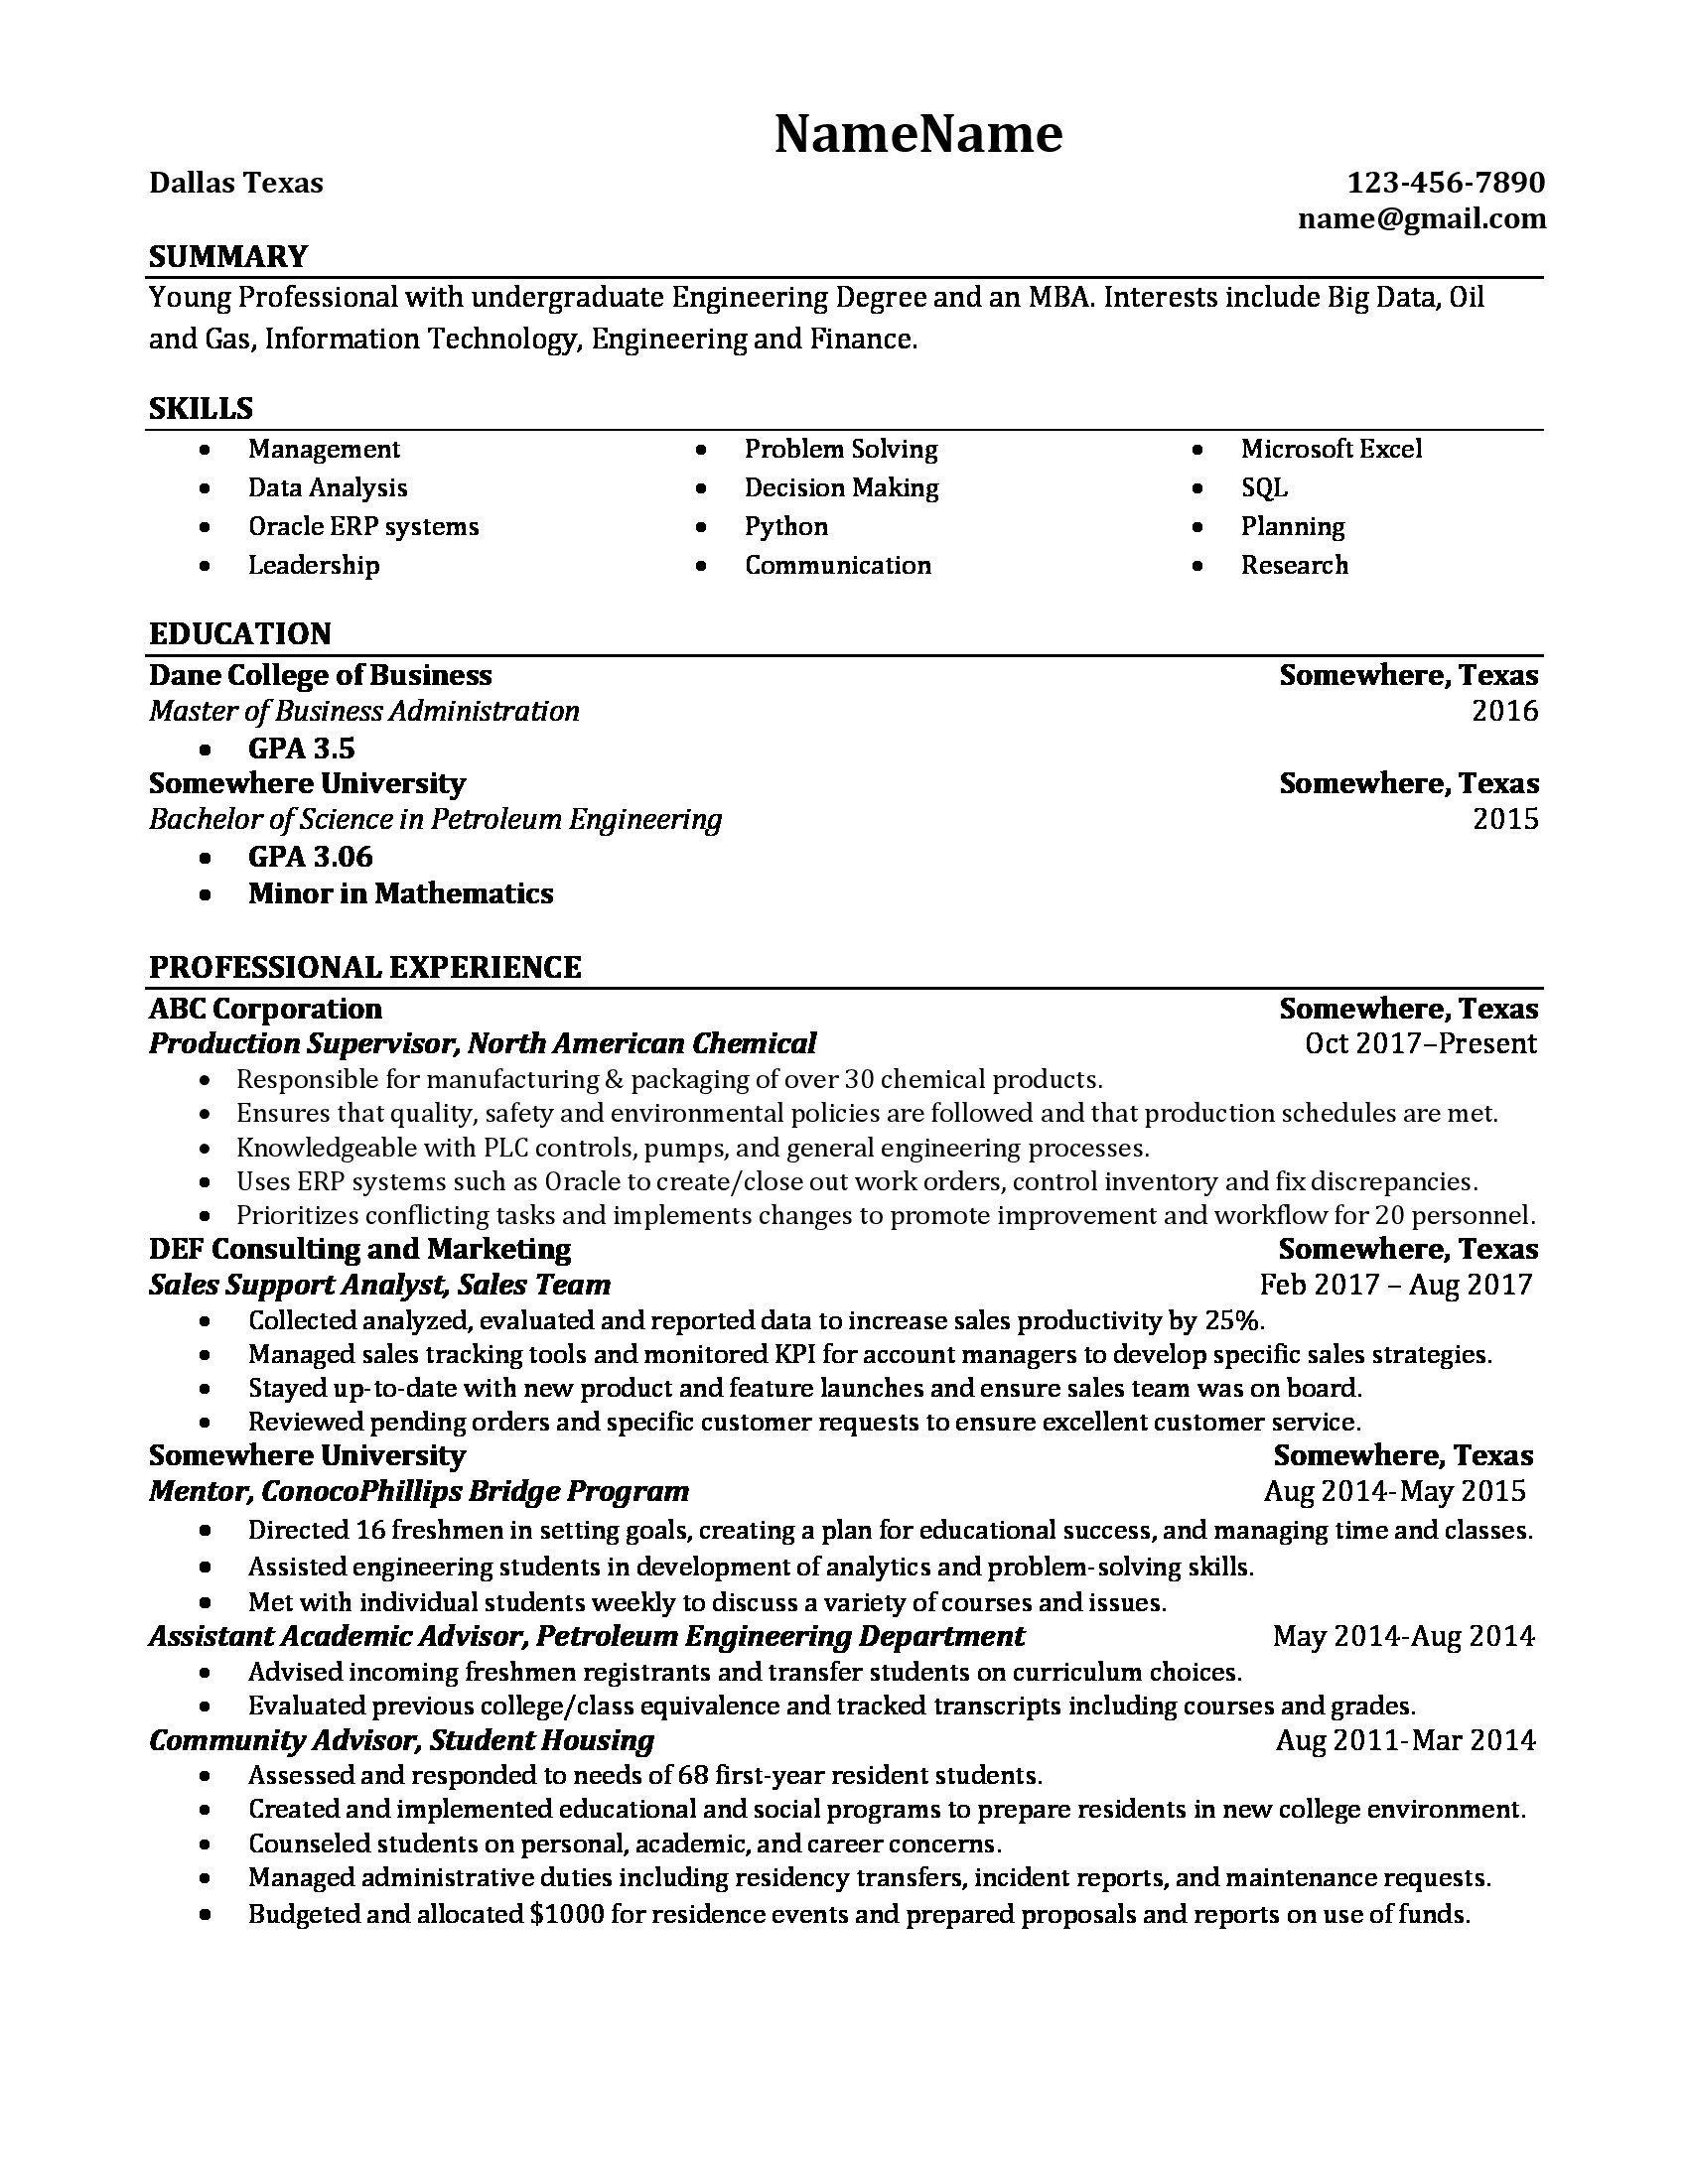 Should I Use A Resume Template Reddit Please Roast My Resume. Thanks! : R/resumes